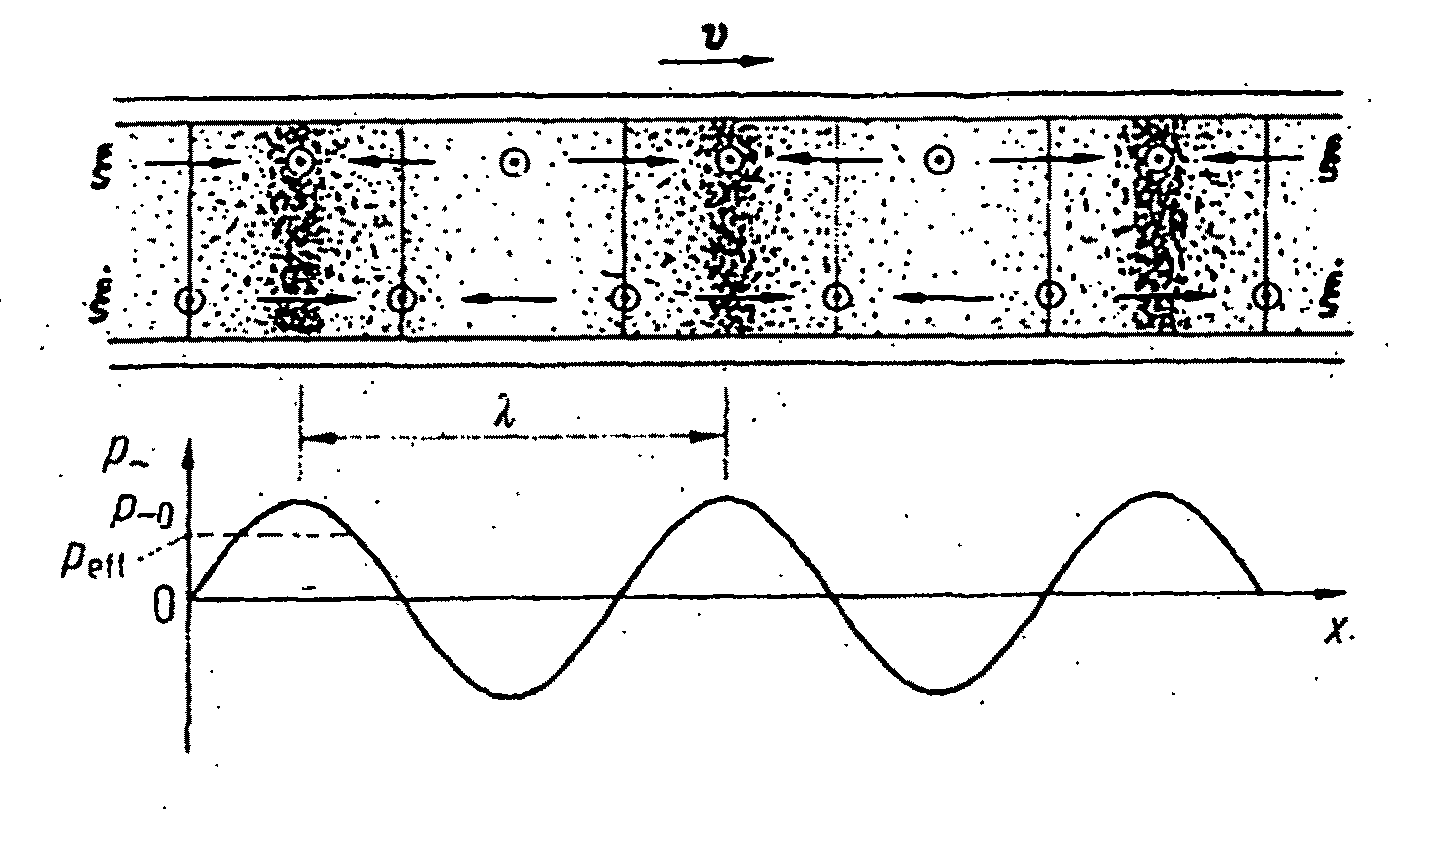 Method for Detecting of Geotectonic Signals Triggered by a Geotectonic Event